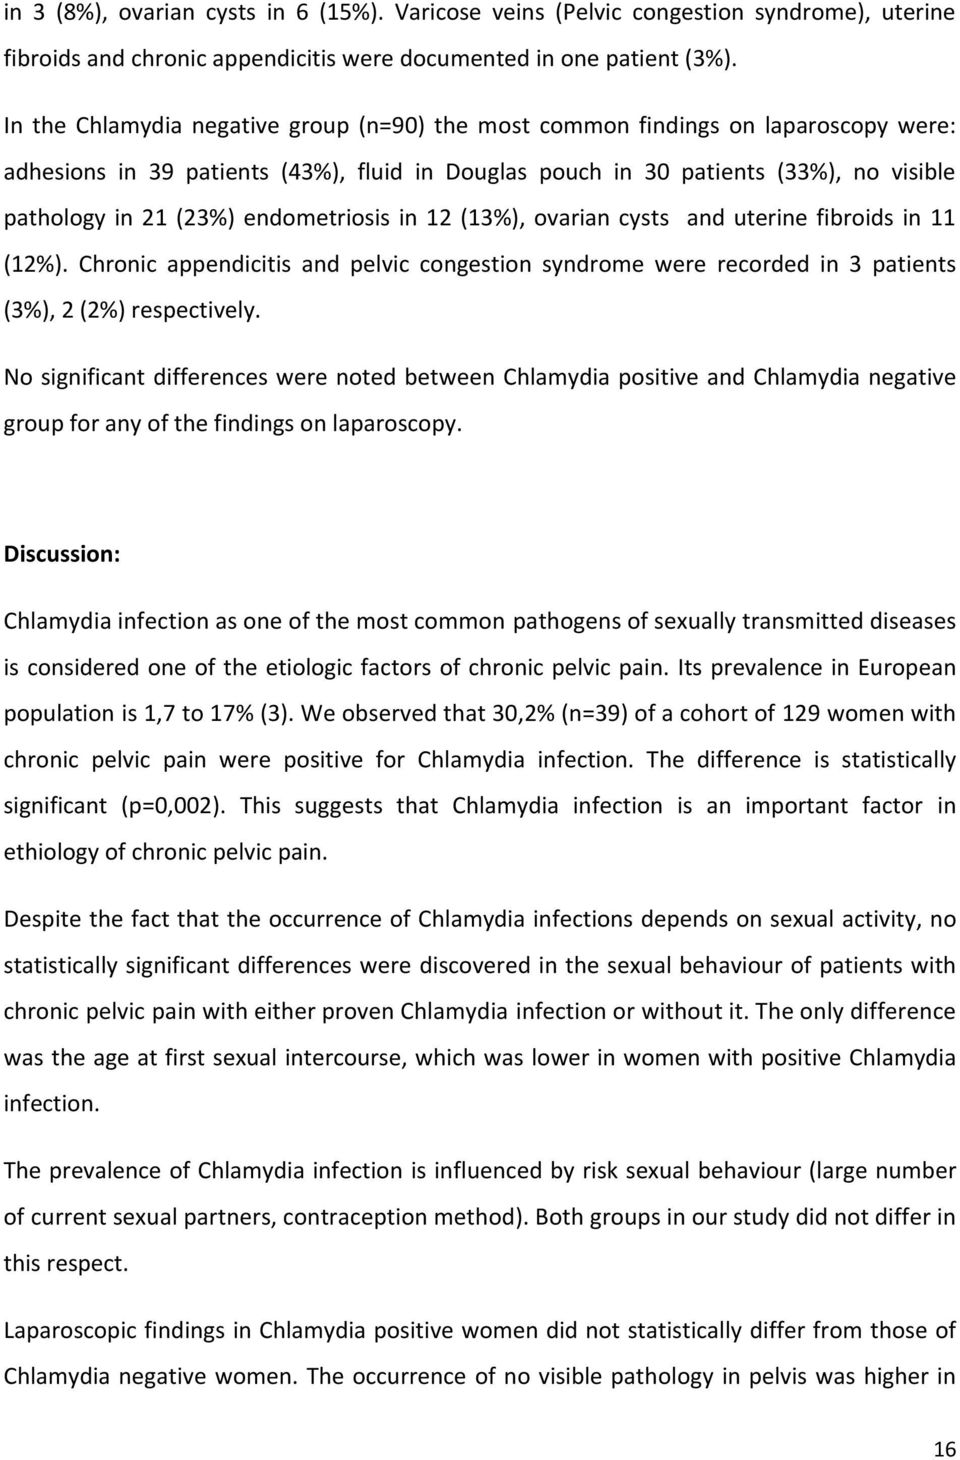 endometriosis in 12 (13%), ovarian cysts and uterine fibroids in 11 (12%). Chronic appendicitis and pelvic congestion syndrome were recorded in 3 patients (3%), 2 (2%) respectively.